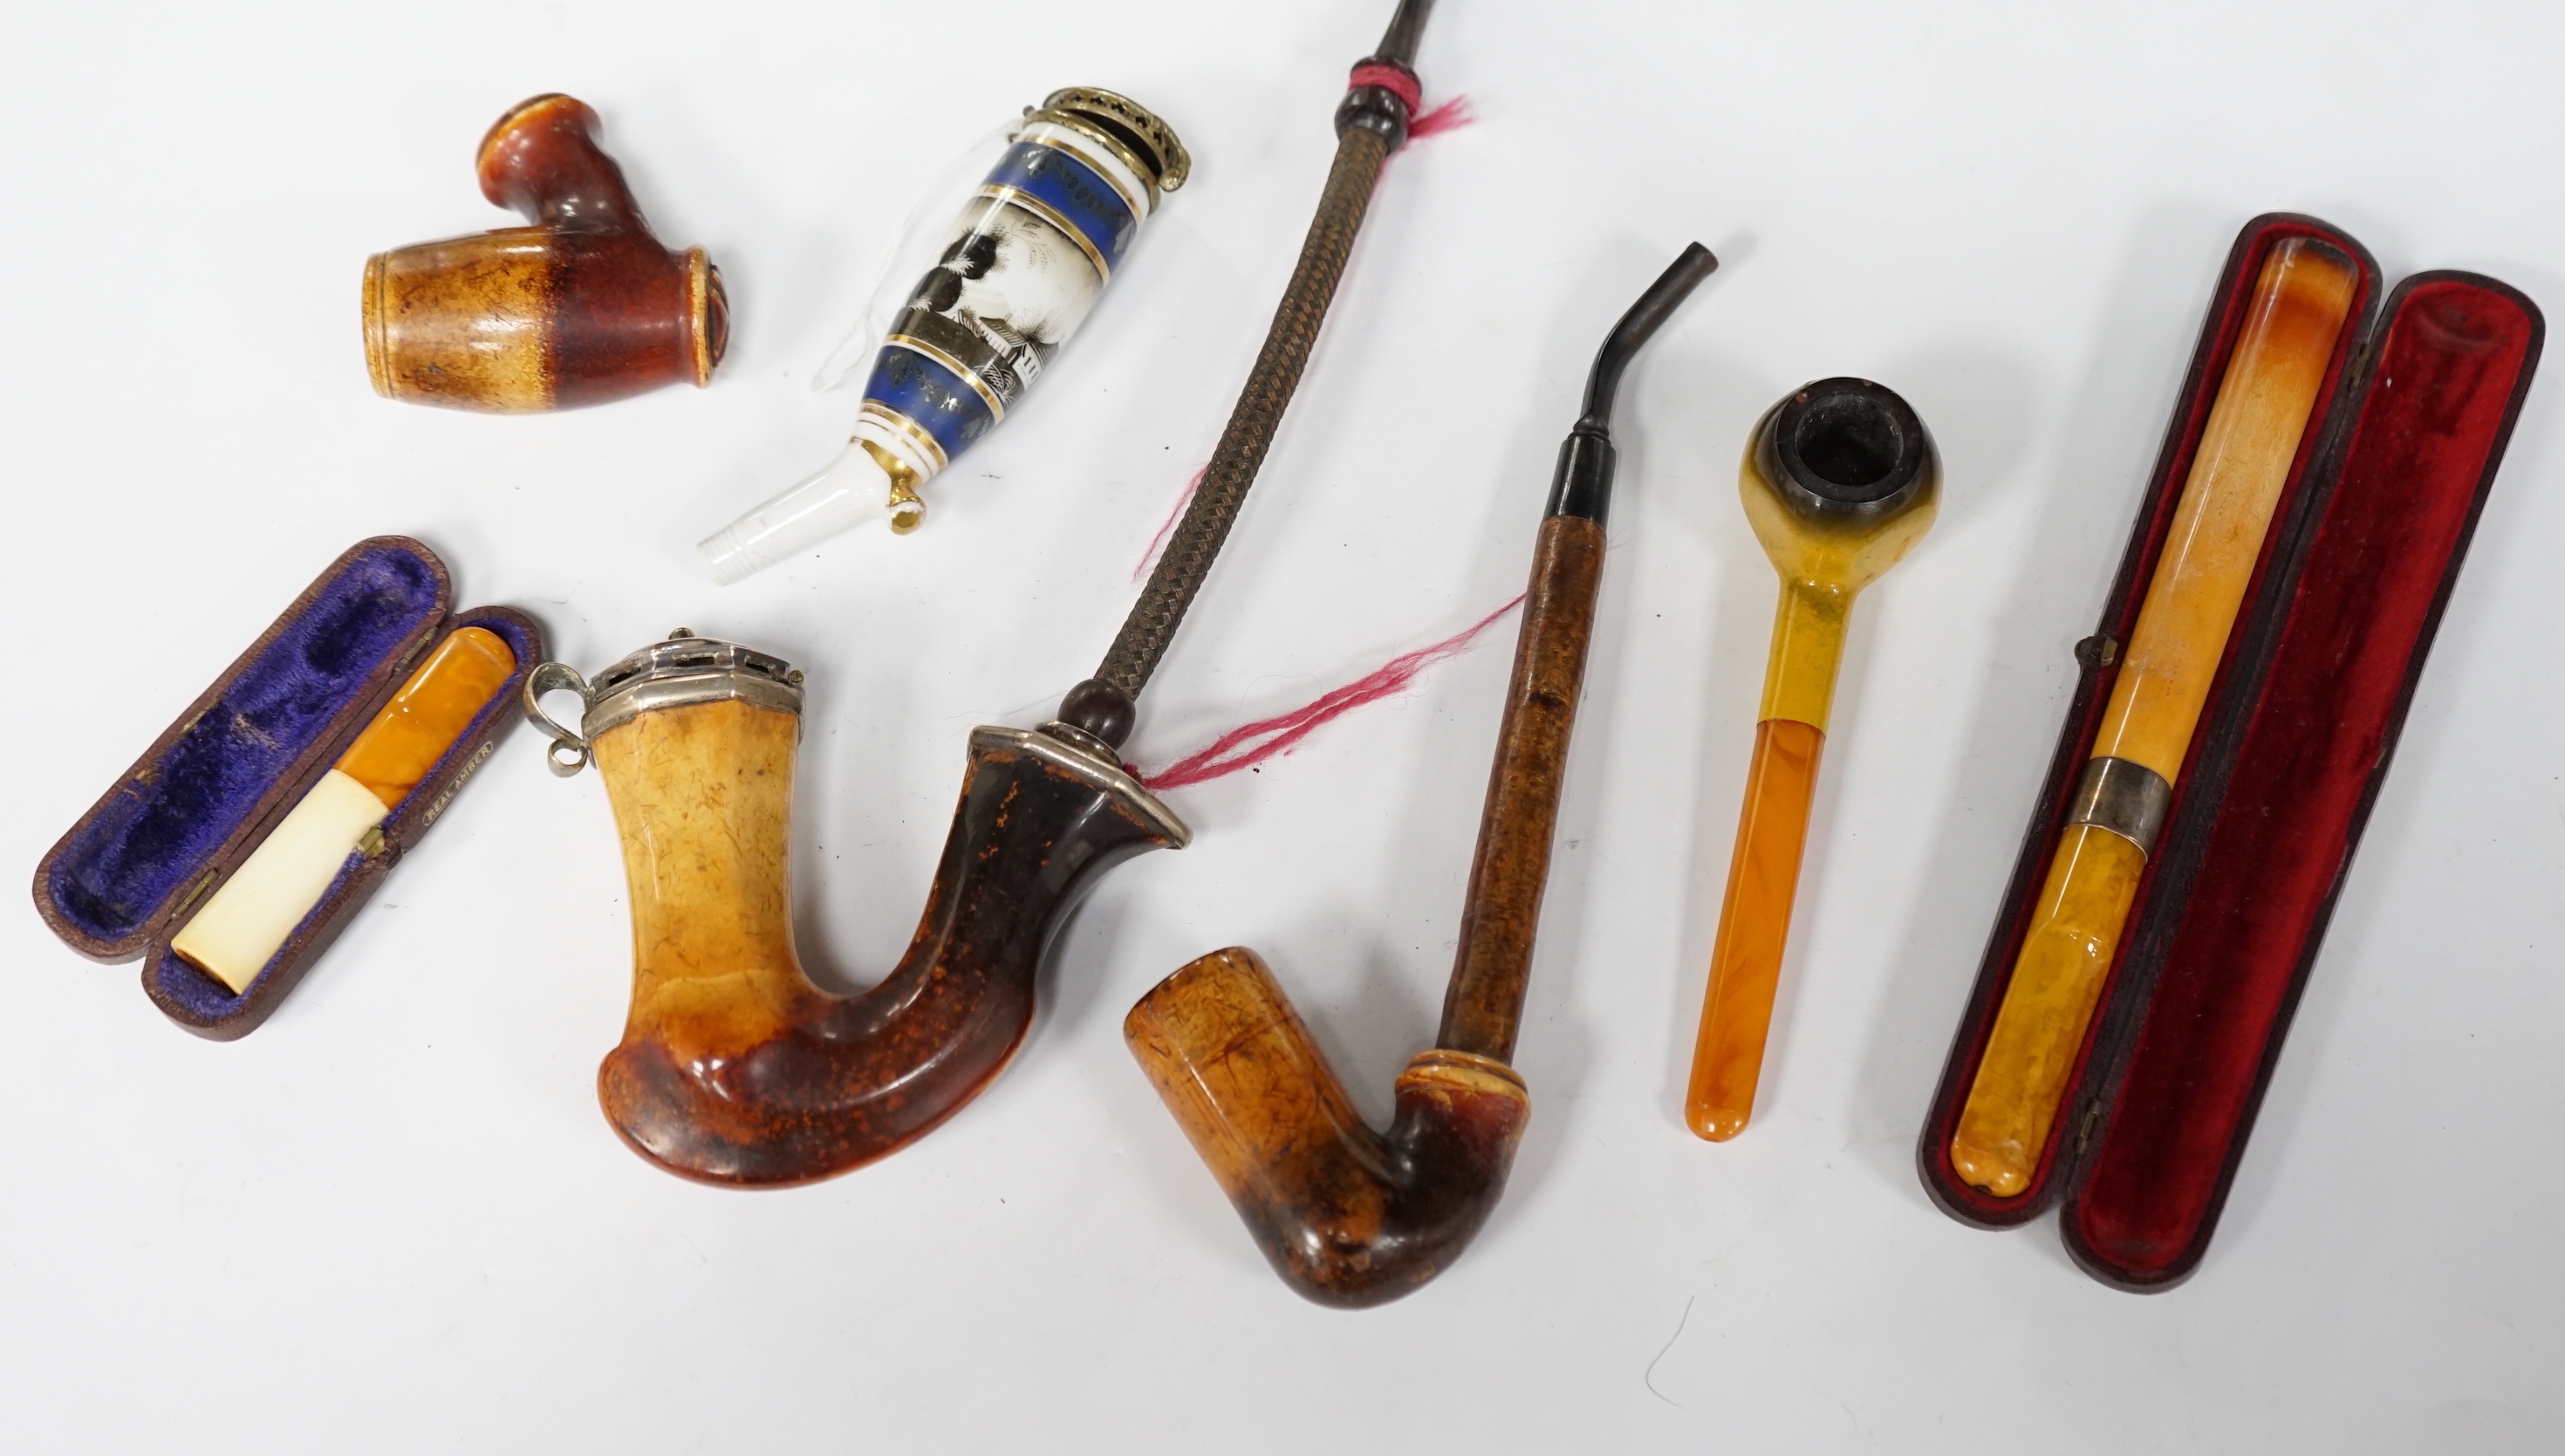 Seven pipes, three with amber mouthpieces, two cased and two without mouthpieces, longest cased pipe 20cm long